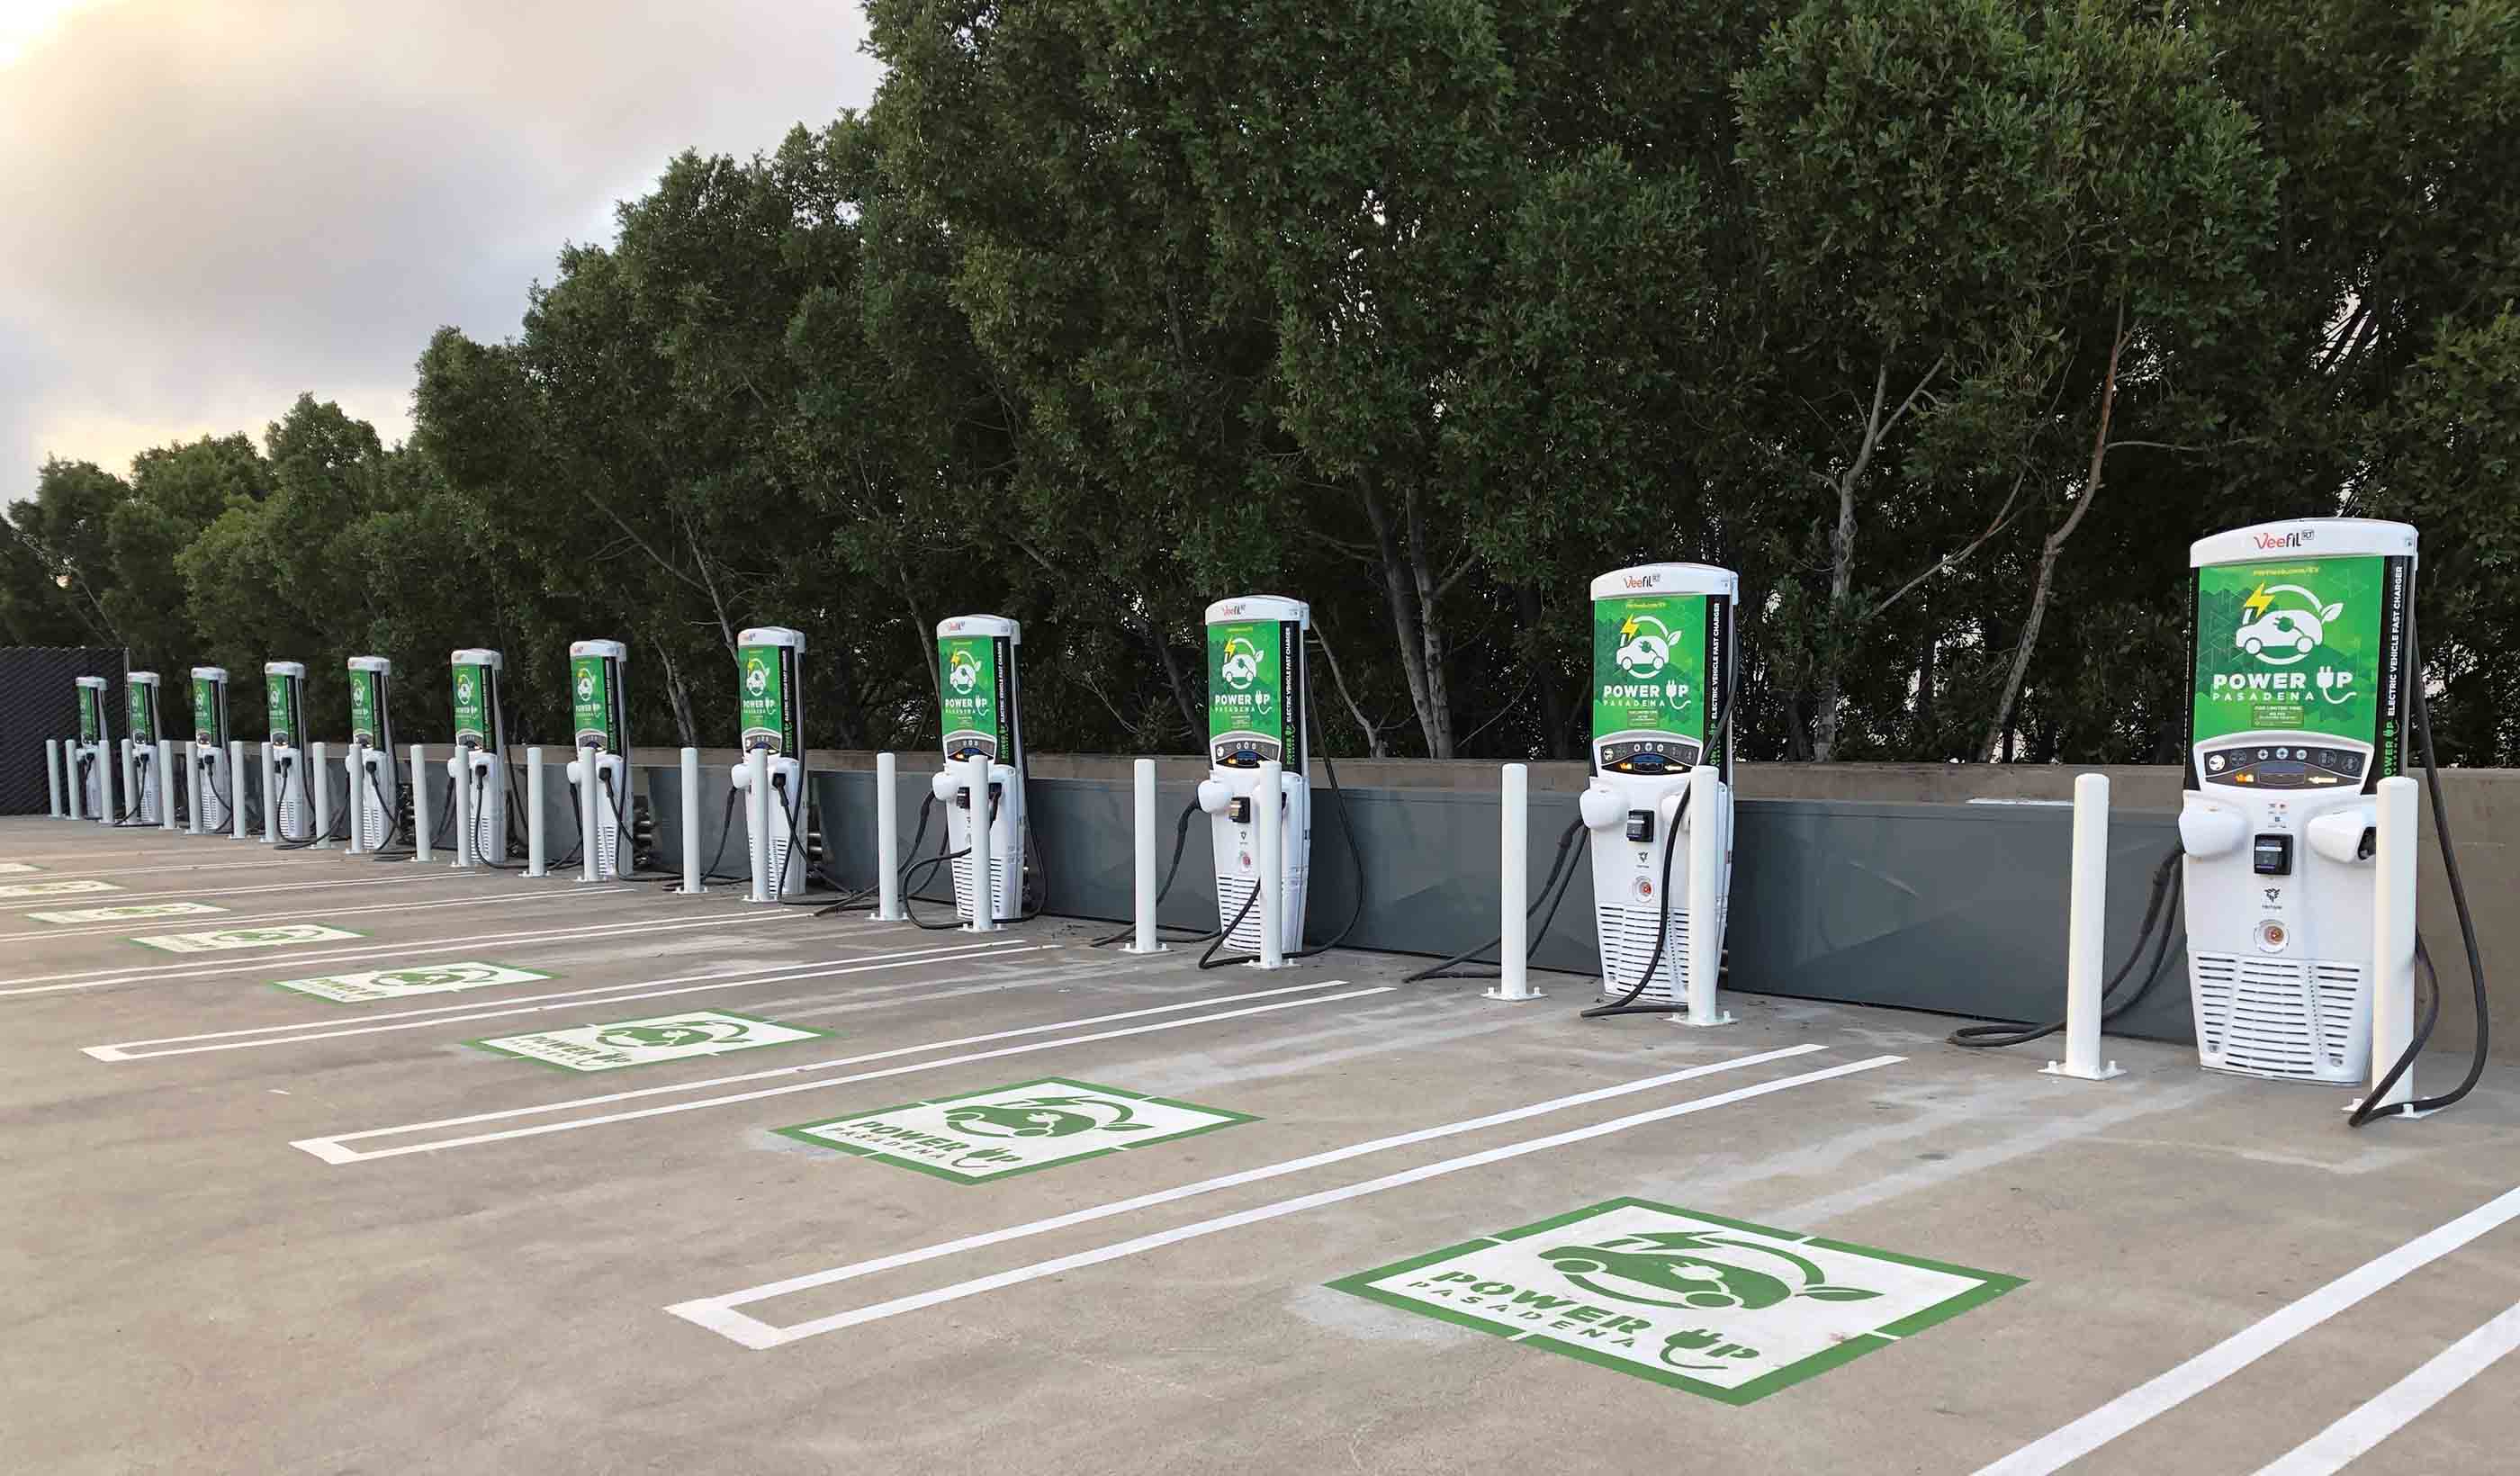 The demand for public EV charging stations is rising